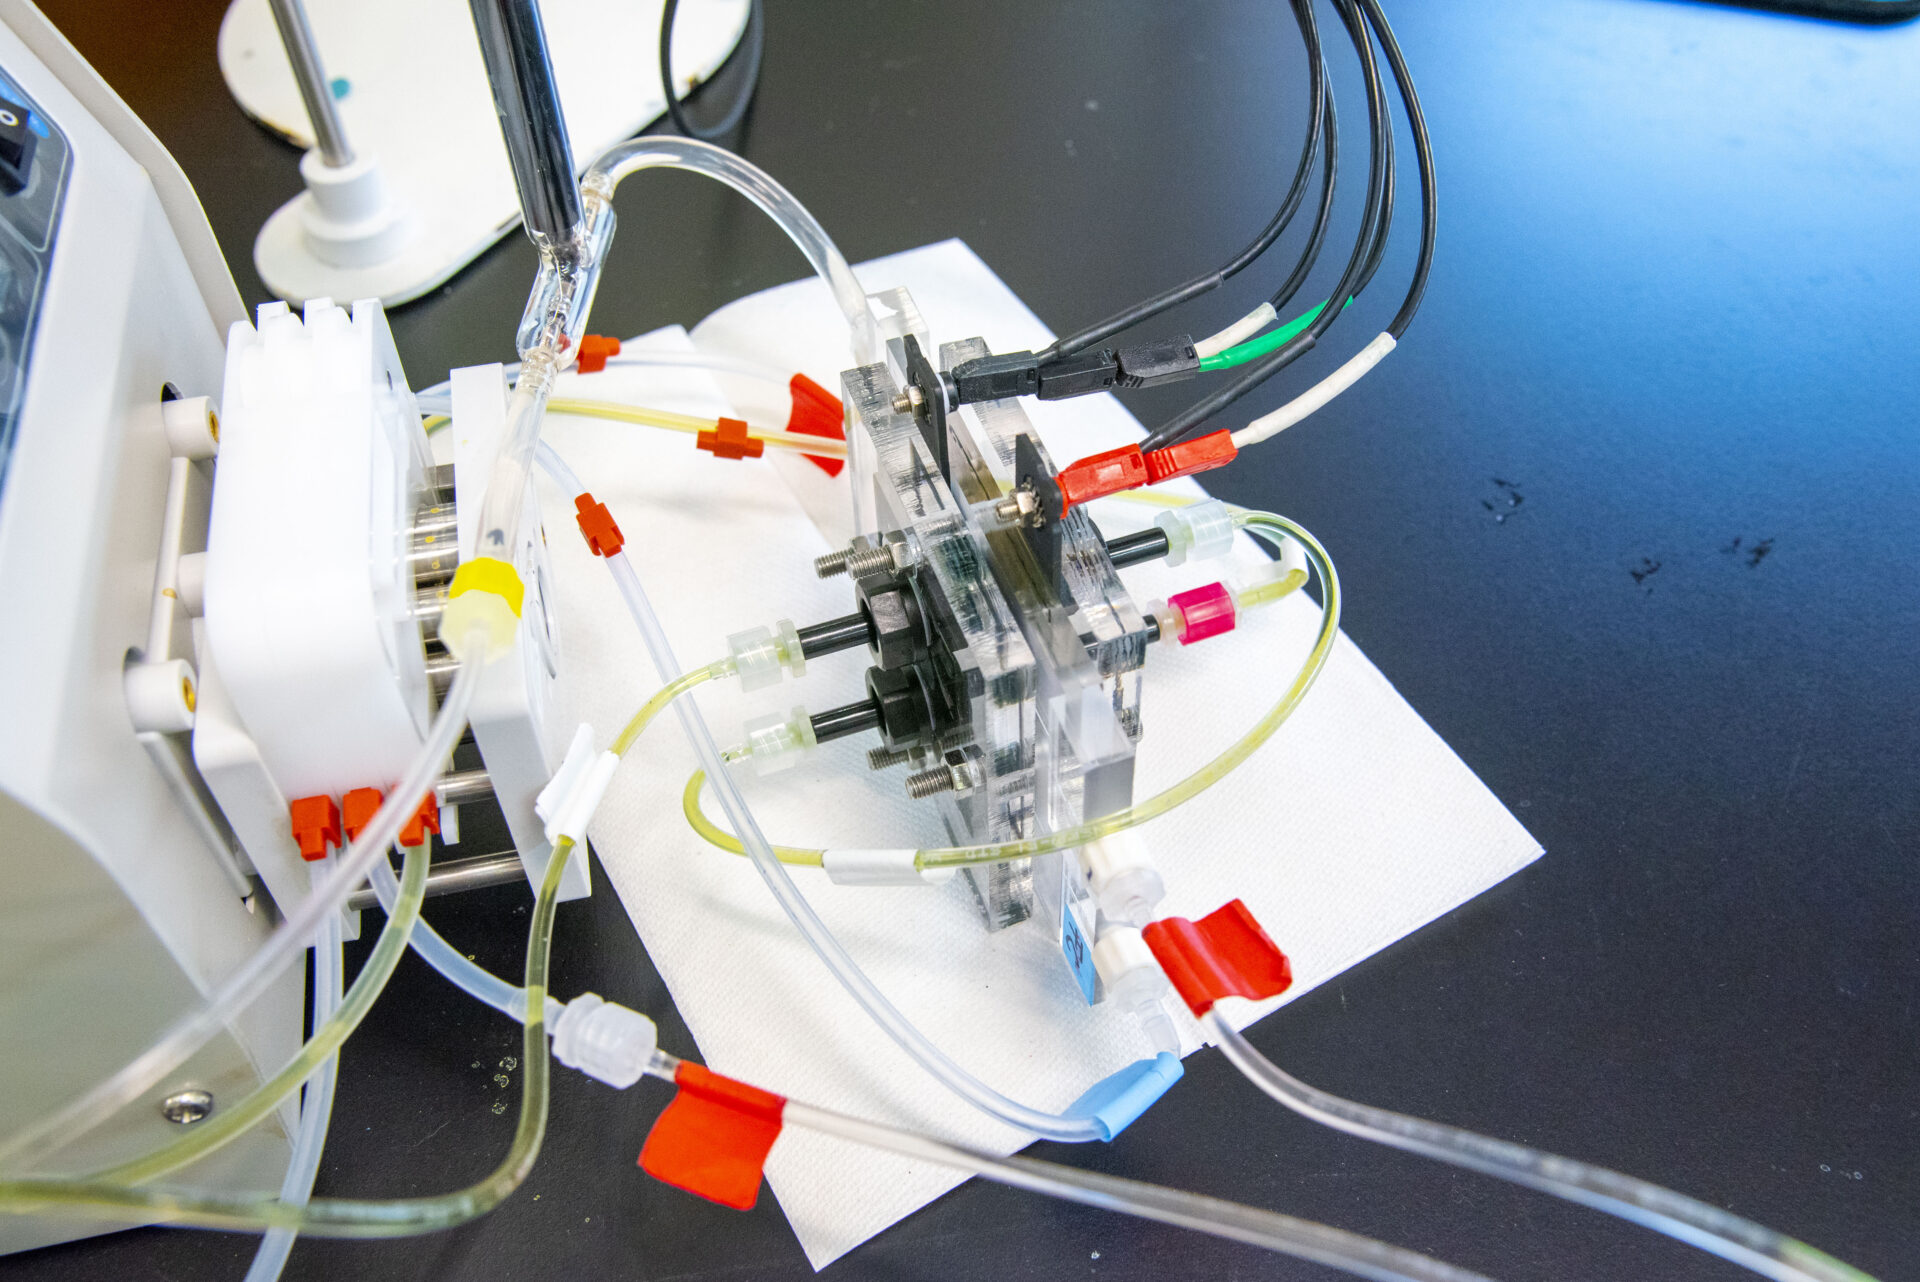 The device created by the researchers to complete their redox-inspired electrodialysis method for water purification.